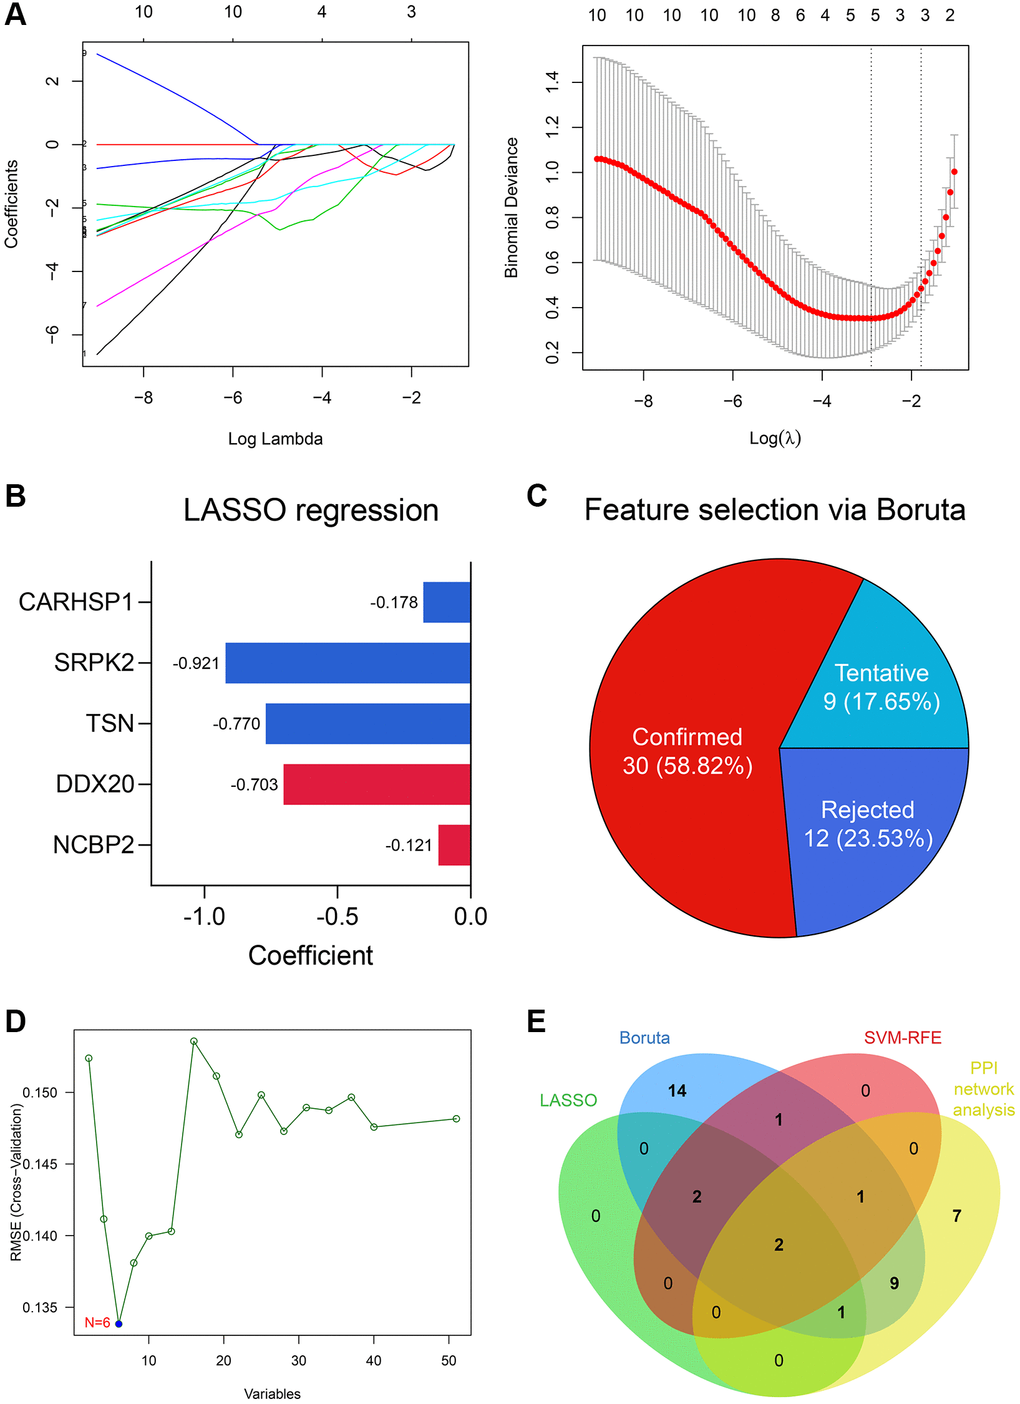 DDX20 and NCBP2 were con-determined via feature selection methods and PPI network analysis. (A) 5 genes, including NCBP2, DDX20, TSN, SRPK2, and CARHSP1, were identified as significant features to NOA via LASSO regression. (B) The coefficients of the 5 selected genes in the LASSO regression model. (C) 30 genes were determined as important features via the Boruta algorithm. (D) 6 genes, including NCBP2, DDX20, CCDC86, TSN, CARHSP1, and TDRD7, were selected by the SVM-RFE. (E) DDX20 and NCBP2 were con-determined by the machine learning algorithms and PPI network analysis.